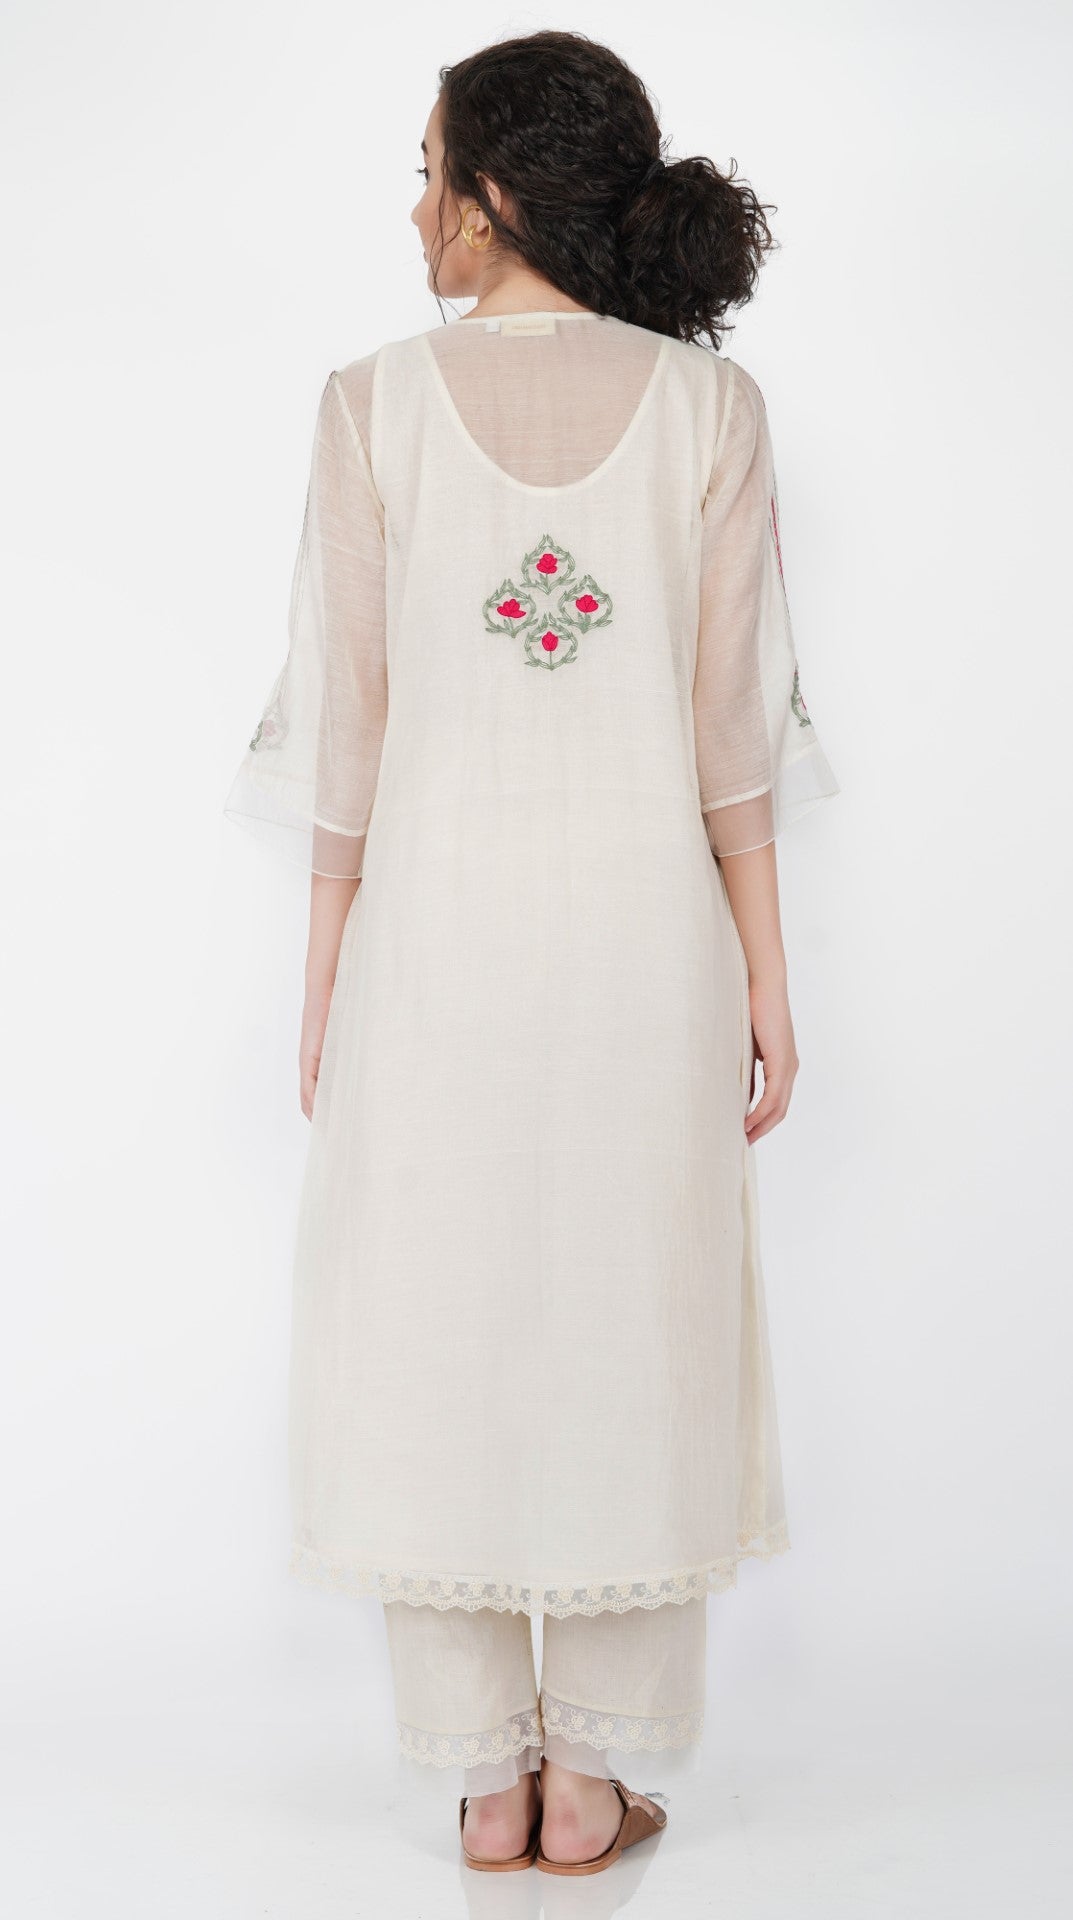 SAAWAN SMOCKING WITH FLORAL EMBROIDERY